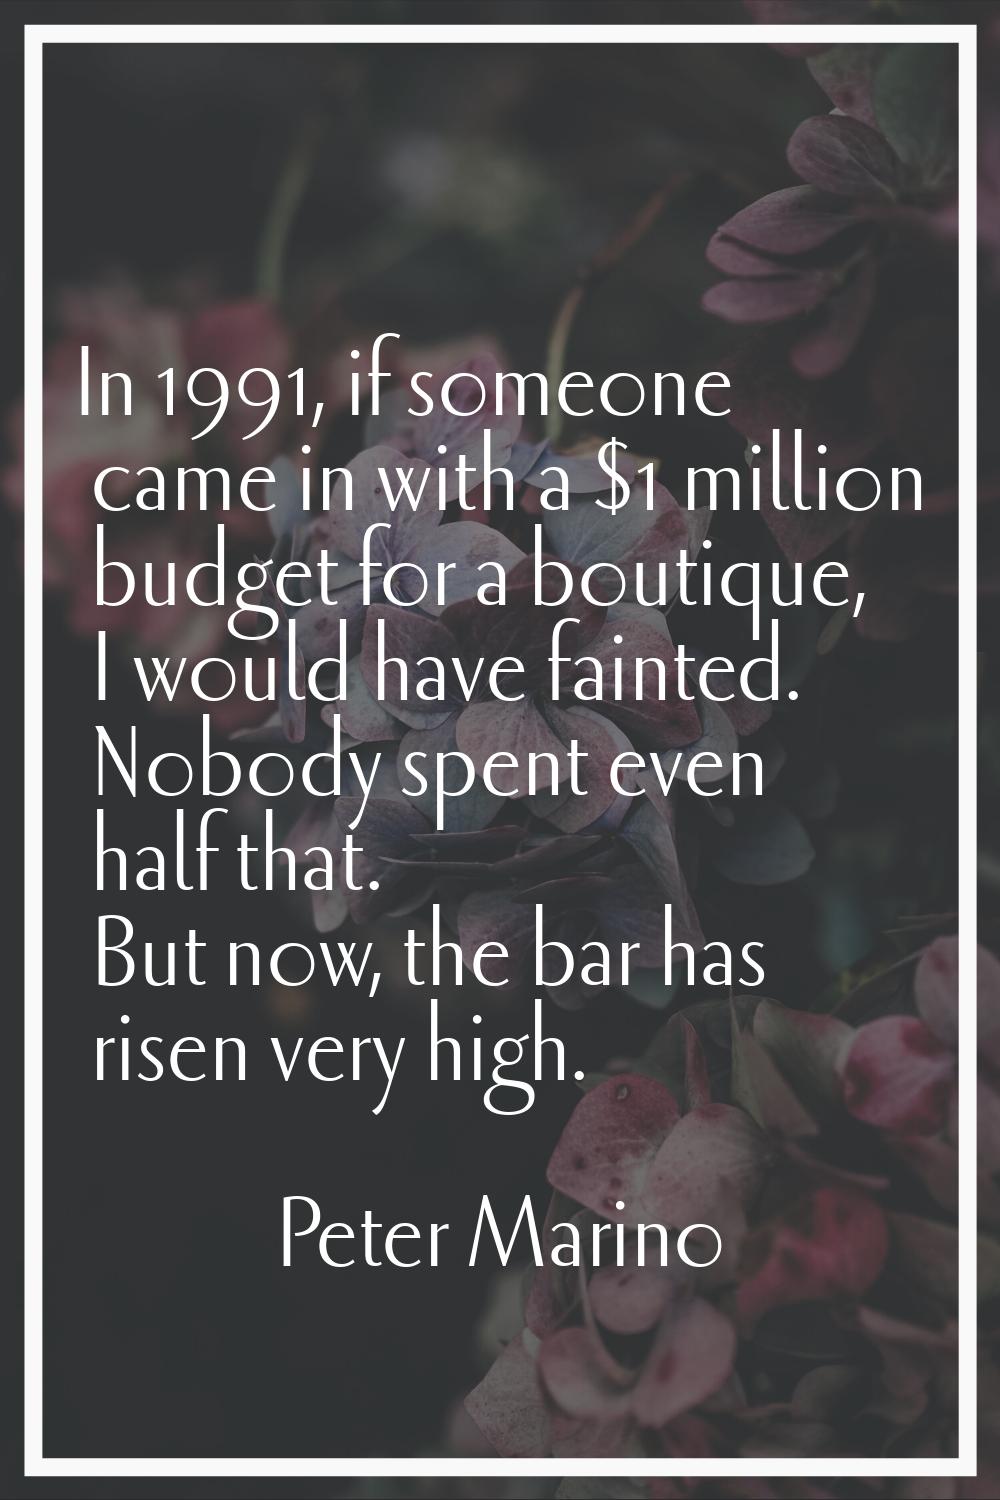 In 1991, if someone came in with a $1 million budget for a boutique, I would have fainted. Nobody s